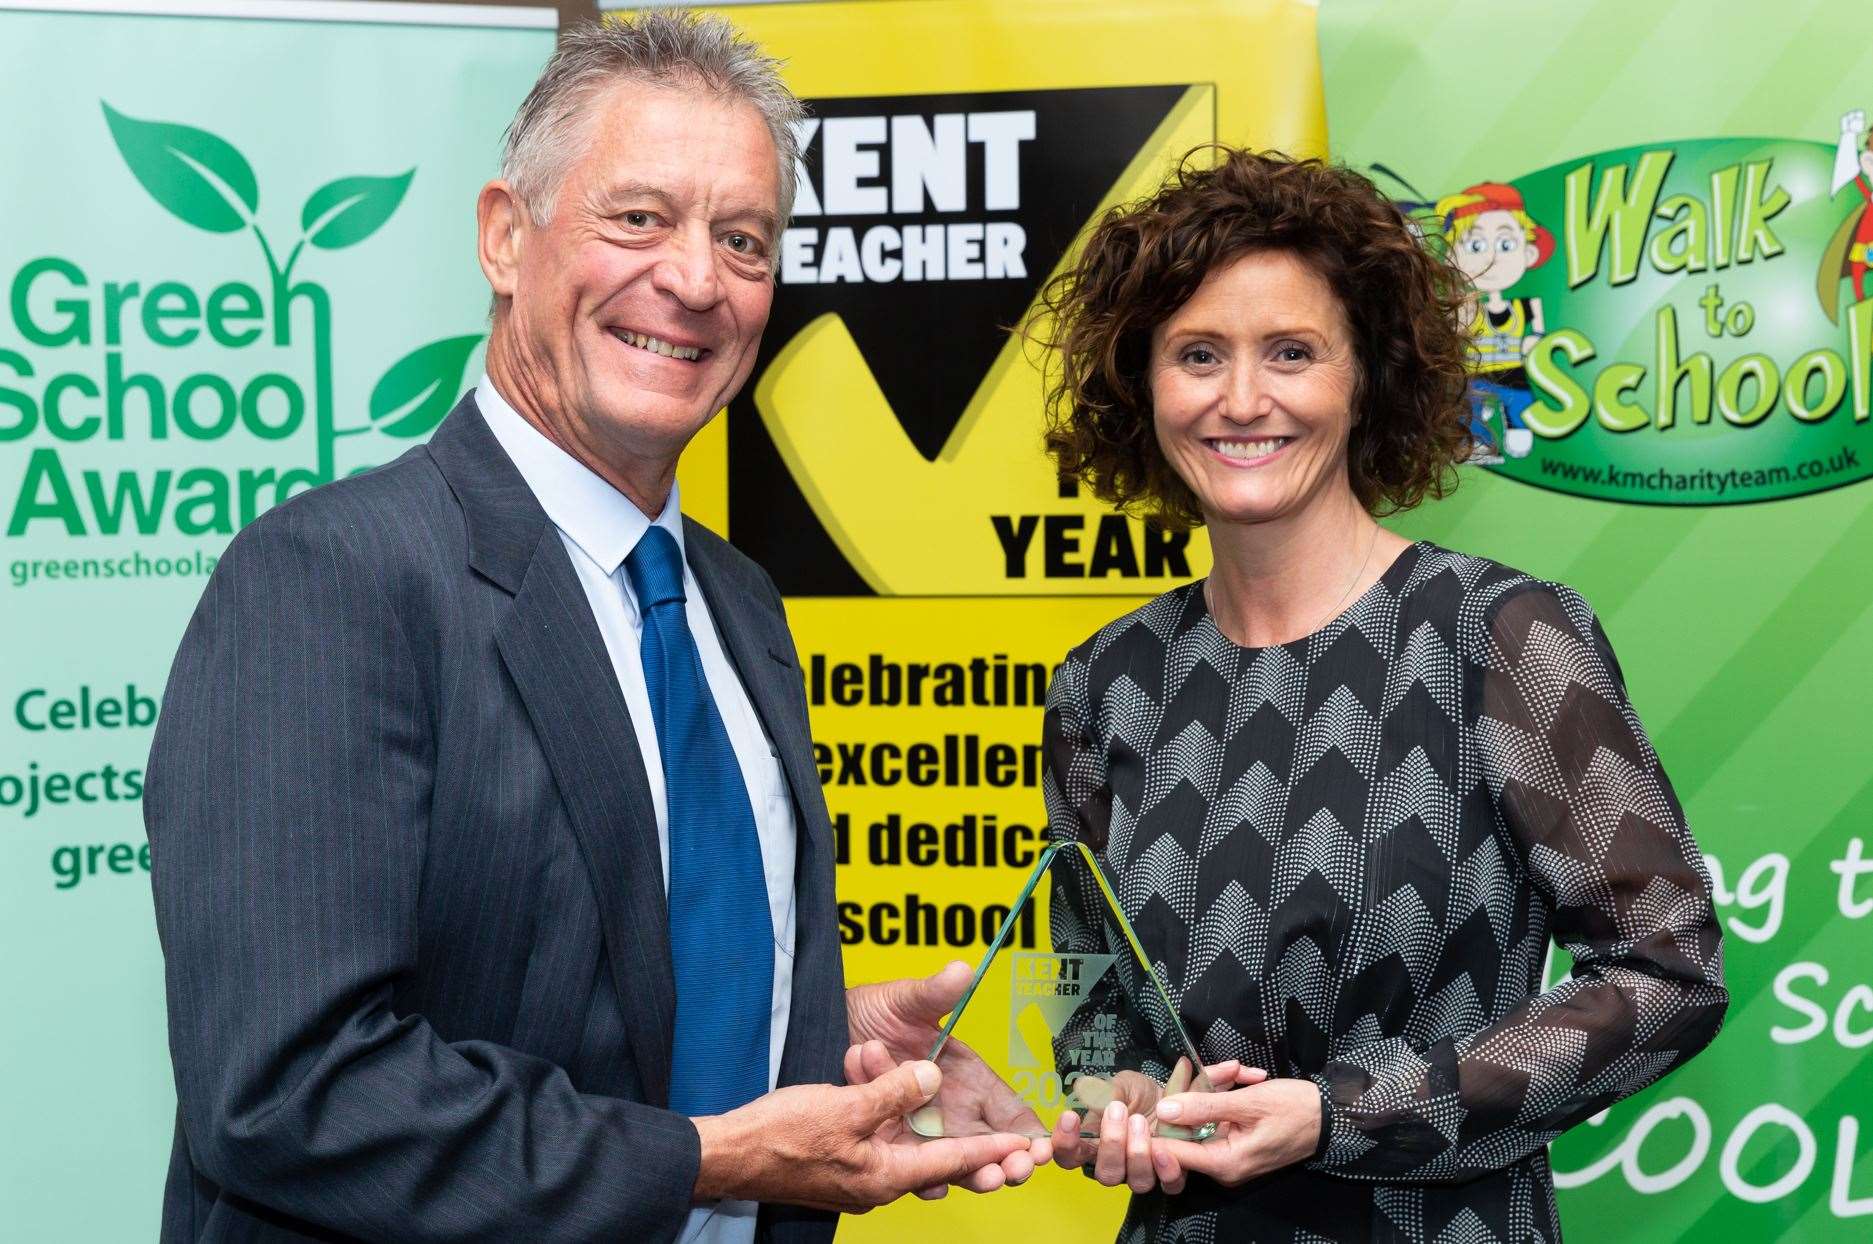 Overall Raising Aspirations Special Award, Nigel Sharp of Greenacre Academy. Presented by Natalie Bond of Three R's Teacher Recruitment. Picture: Countrywide Photographic